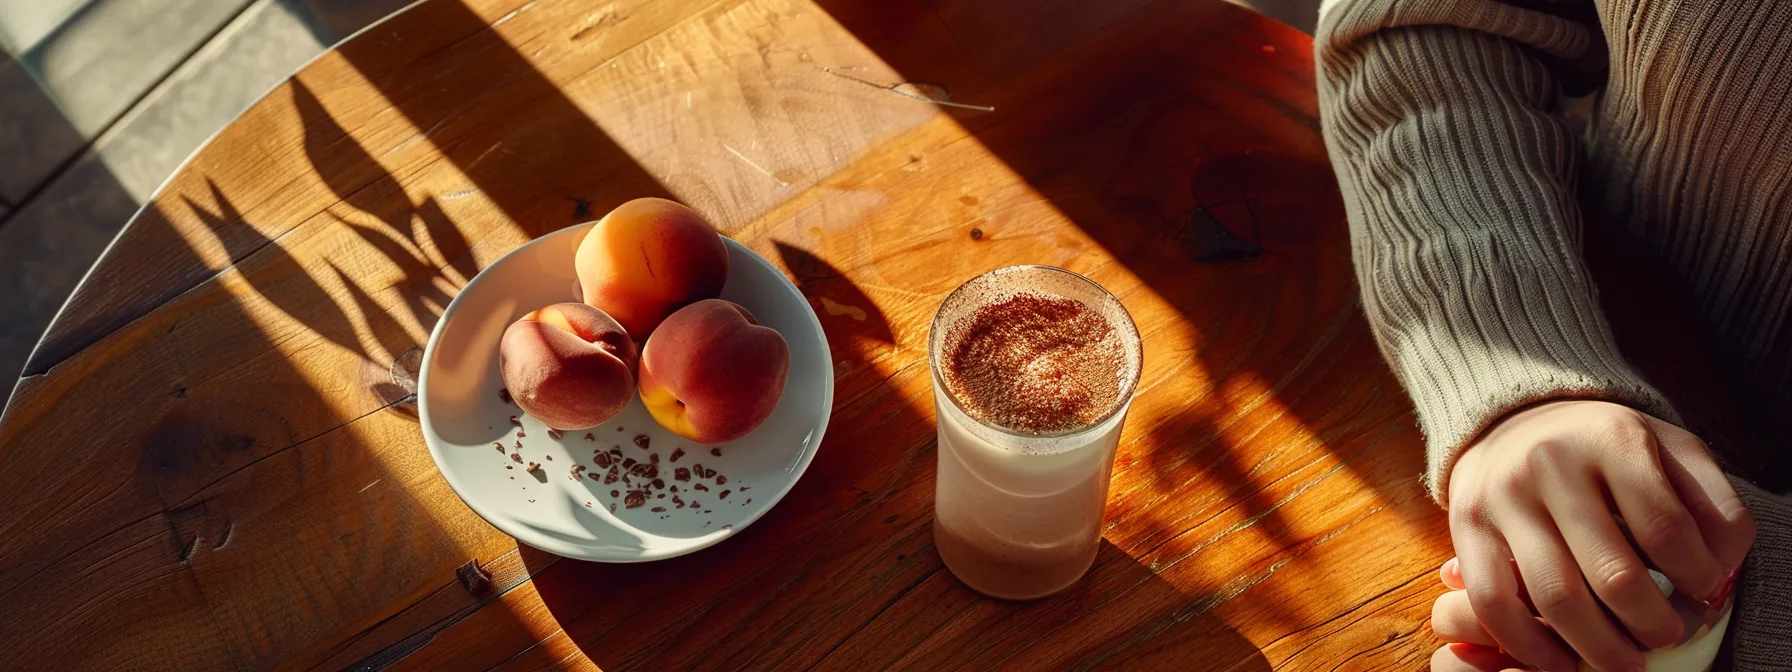 a person drinking a chocolate-flavored shake with a bowl of ripe peaches next to them.